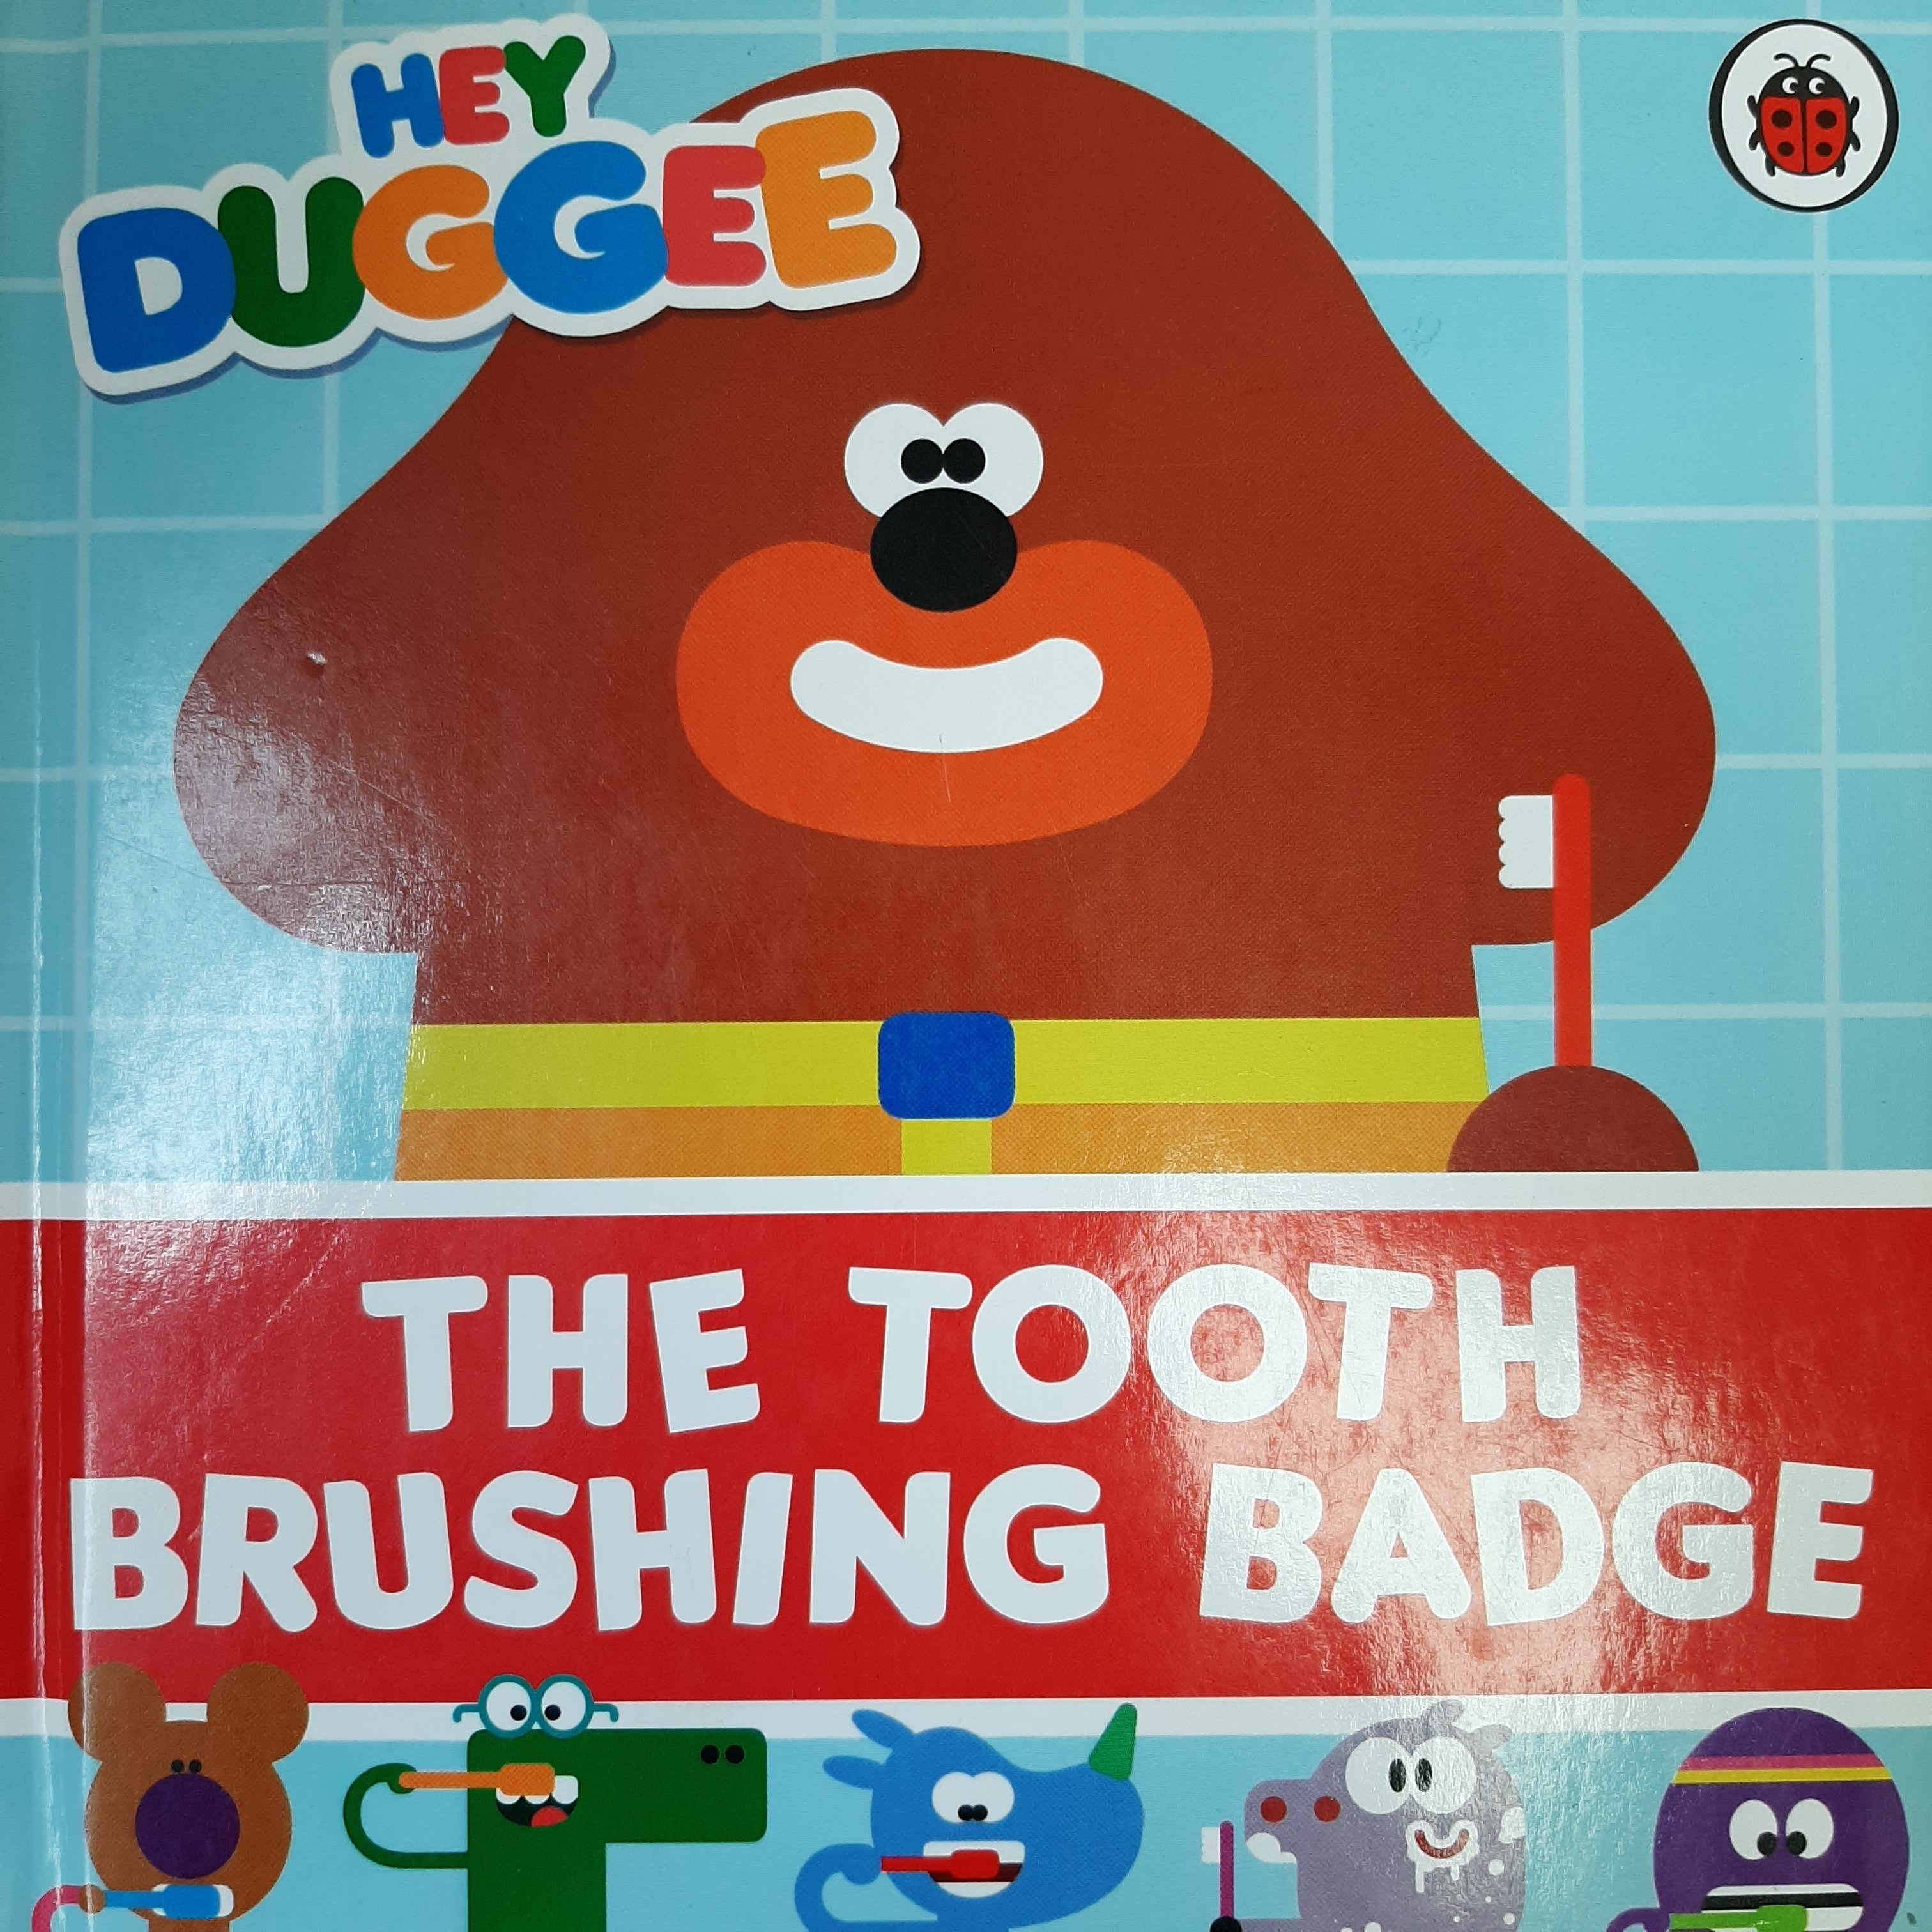 Hey Duggee - The Tooth Brushing Badge book cover